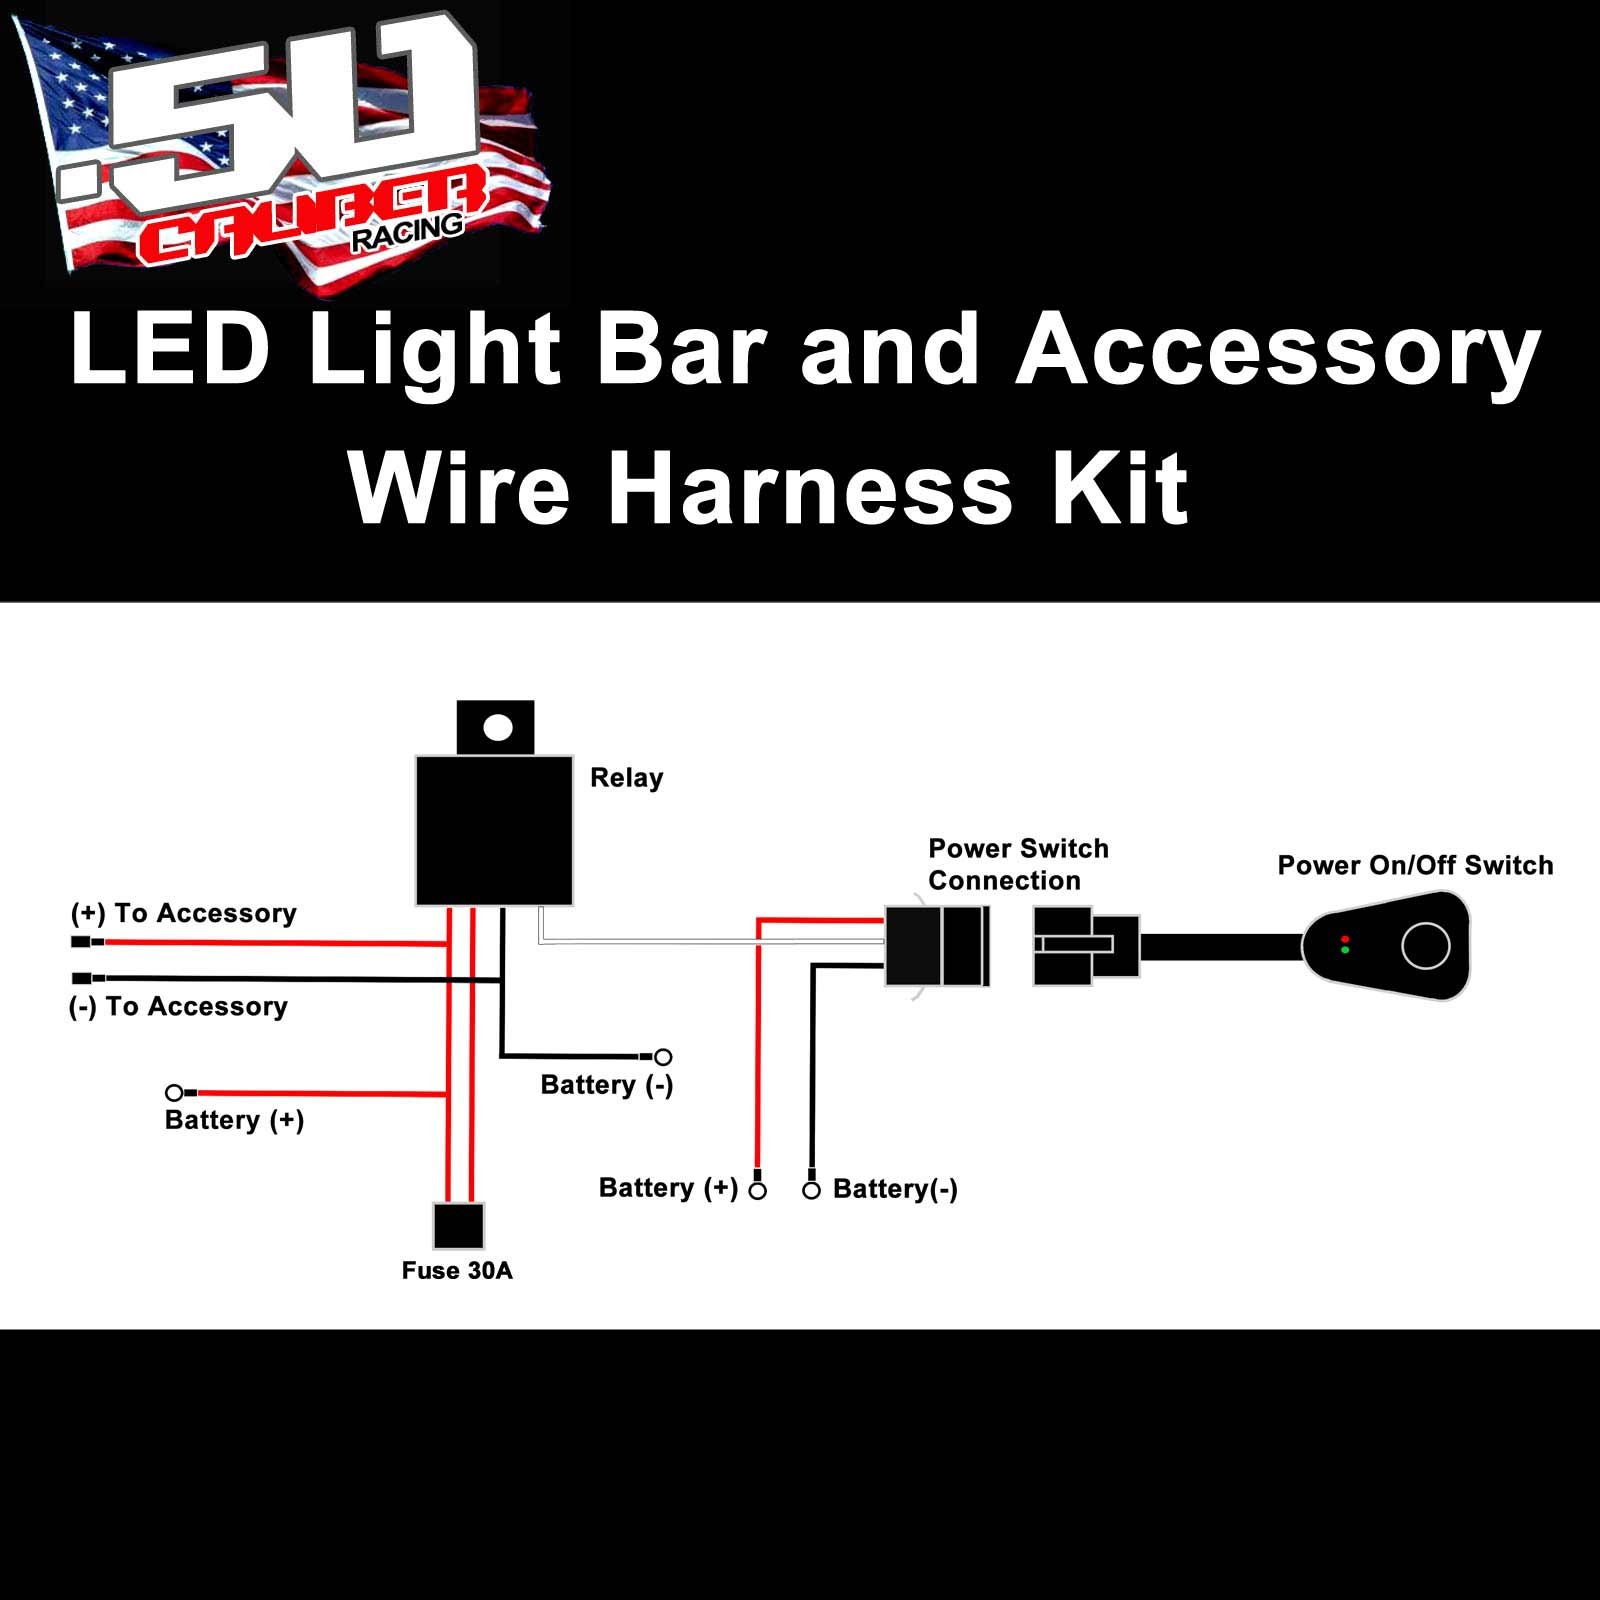 Wiring Diagram For Led Light Bar With Switch And Relay from 50caliberracing.com